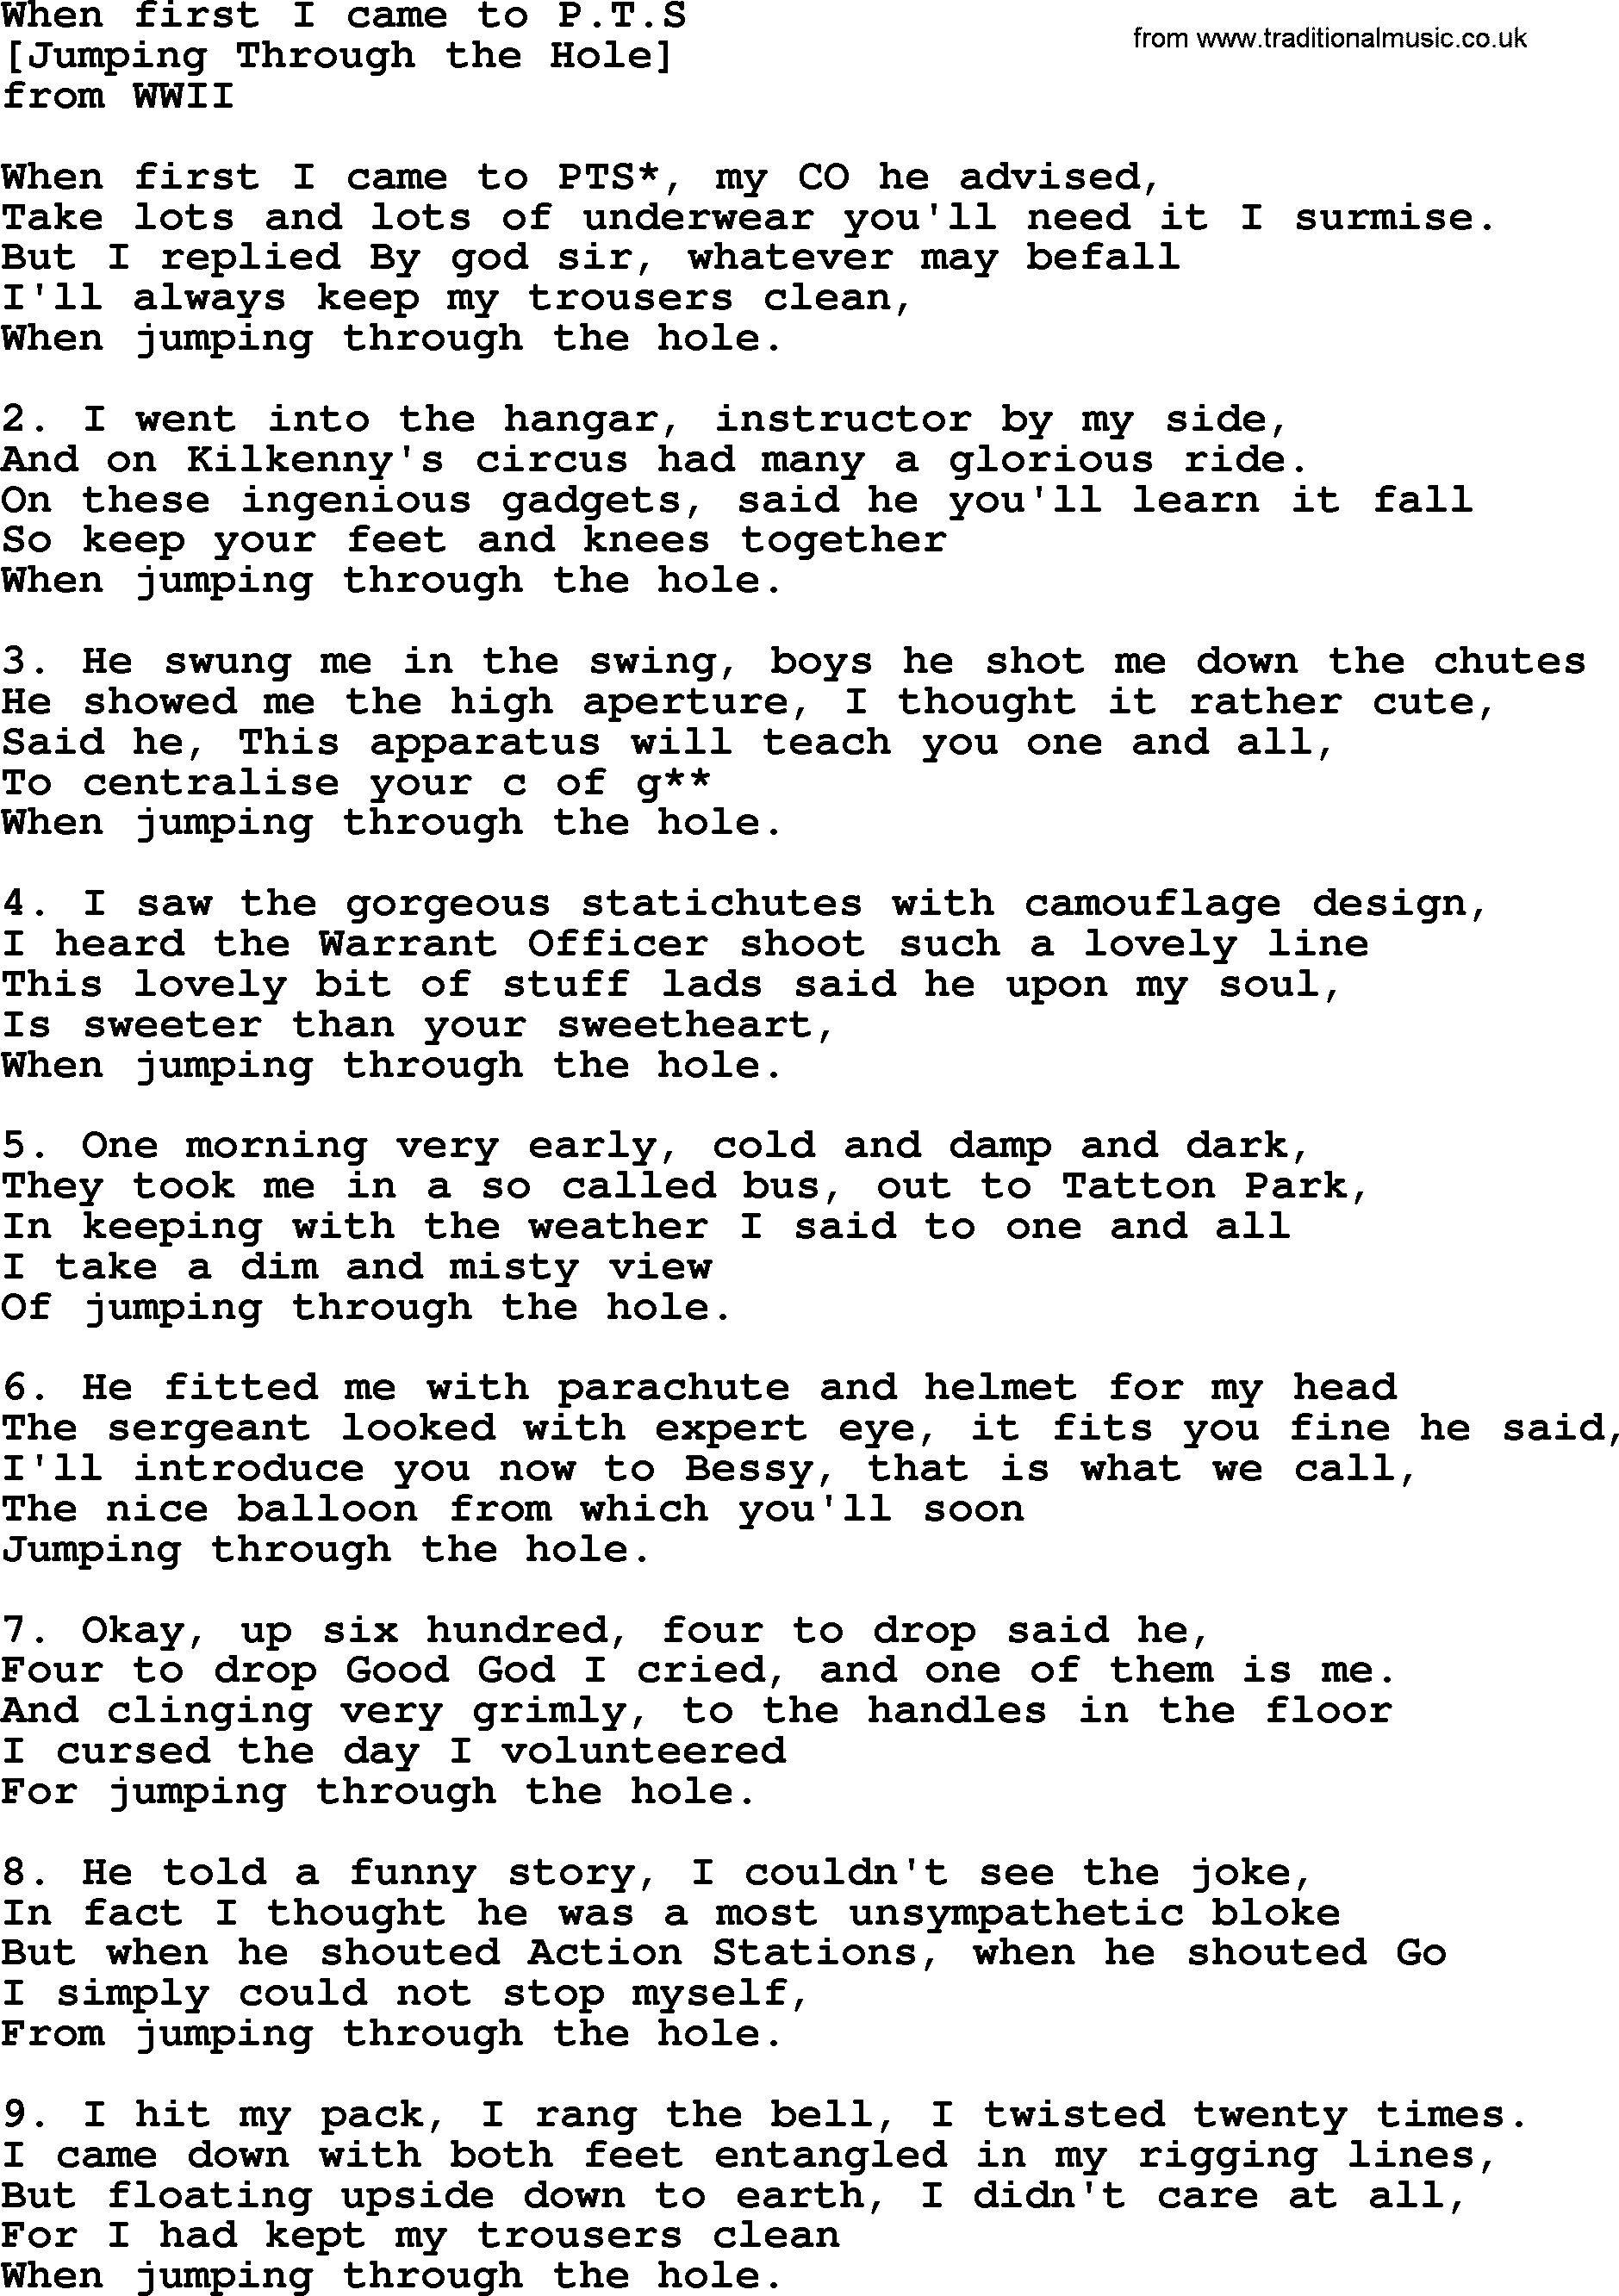 Old English Song: When First I Came To P.T.S lyrics